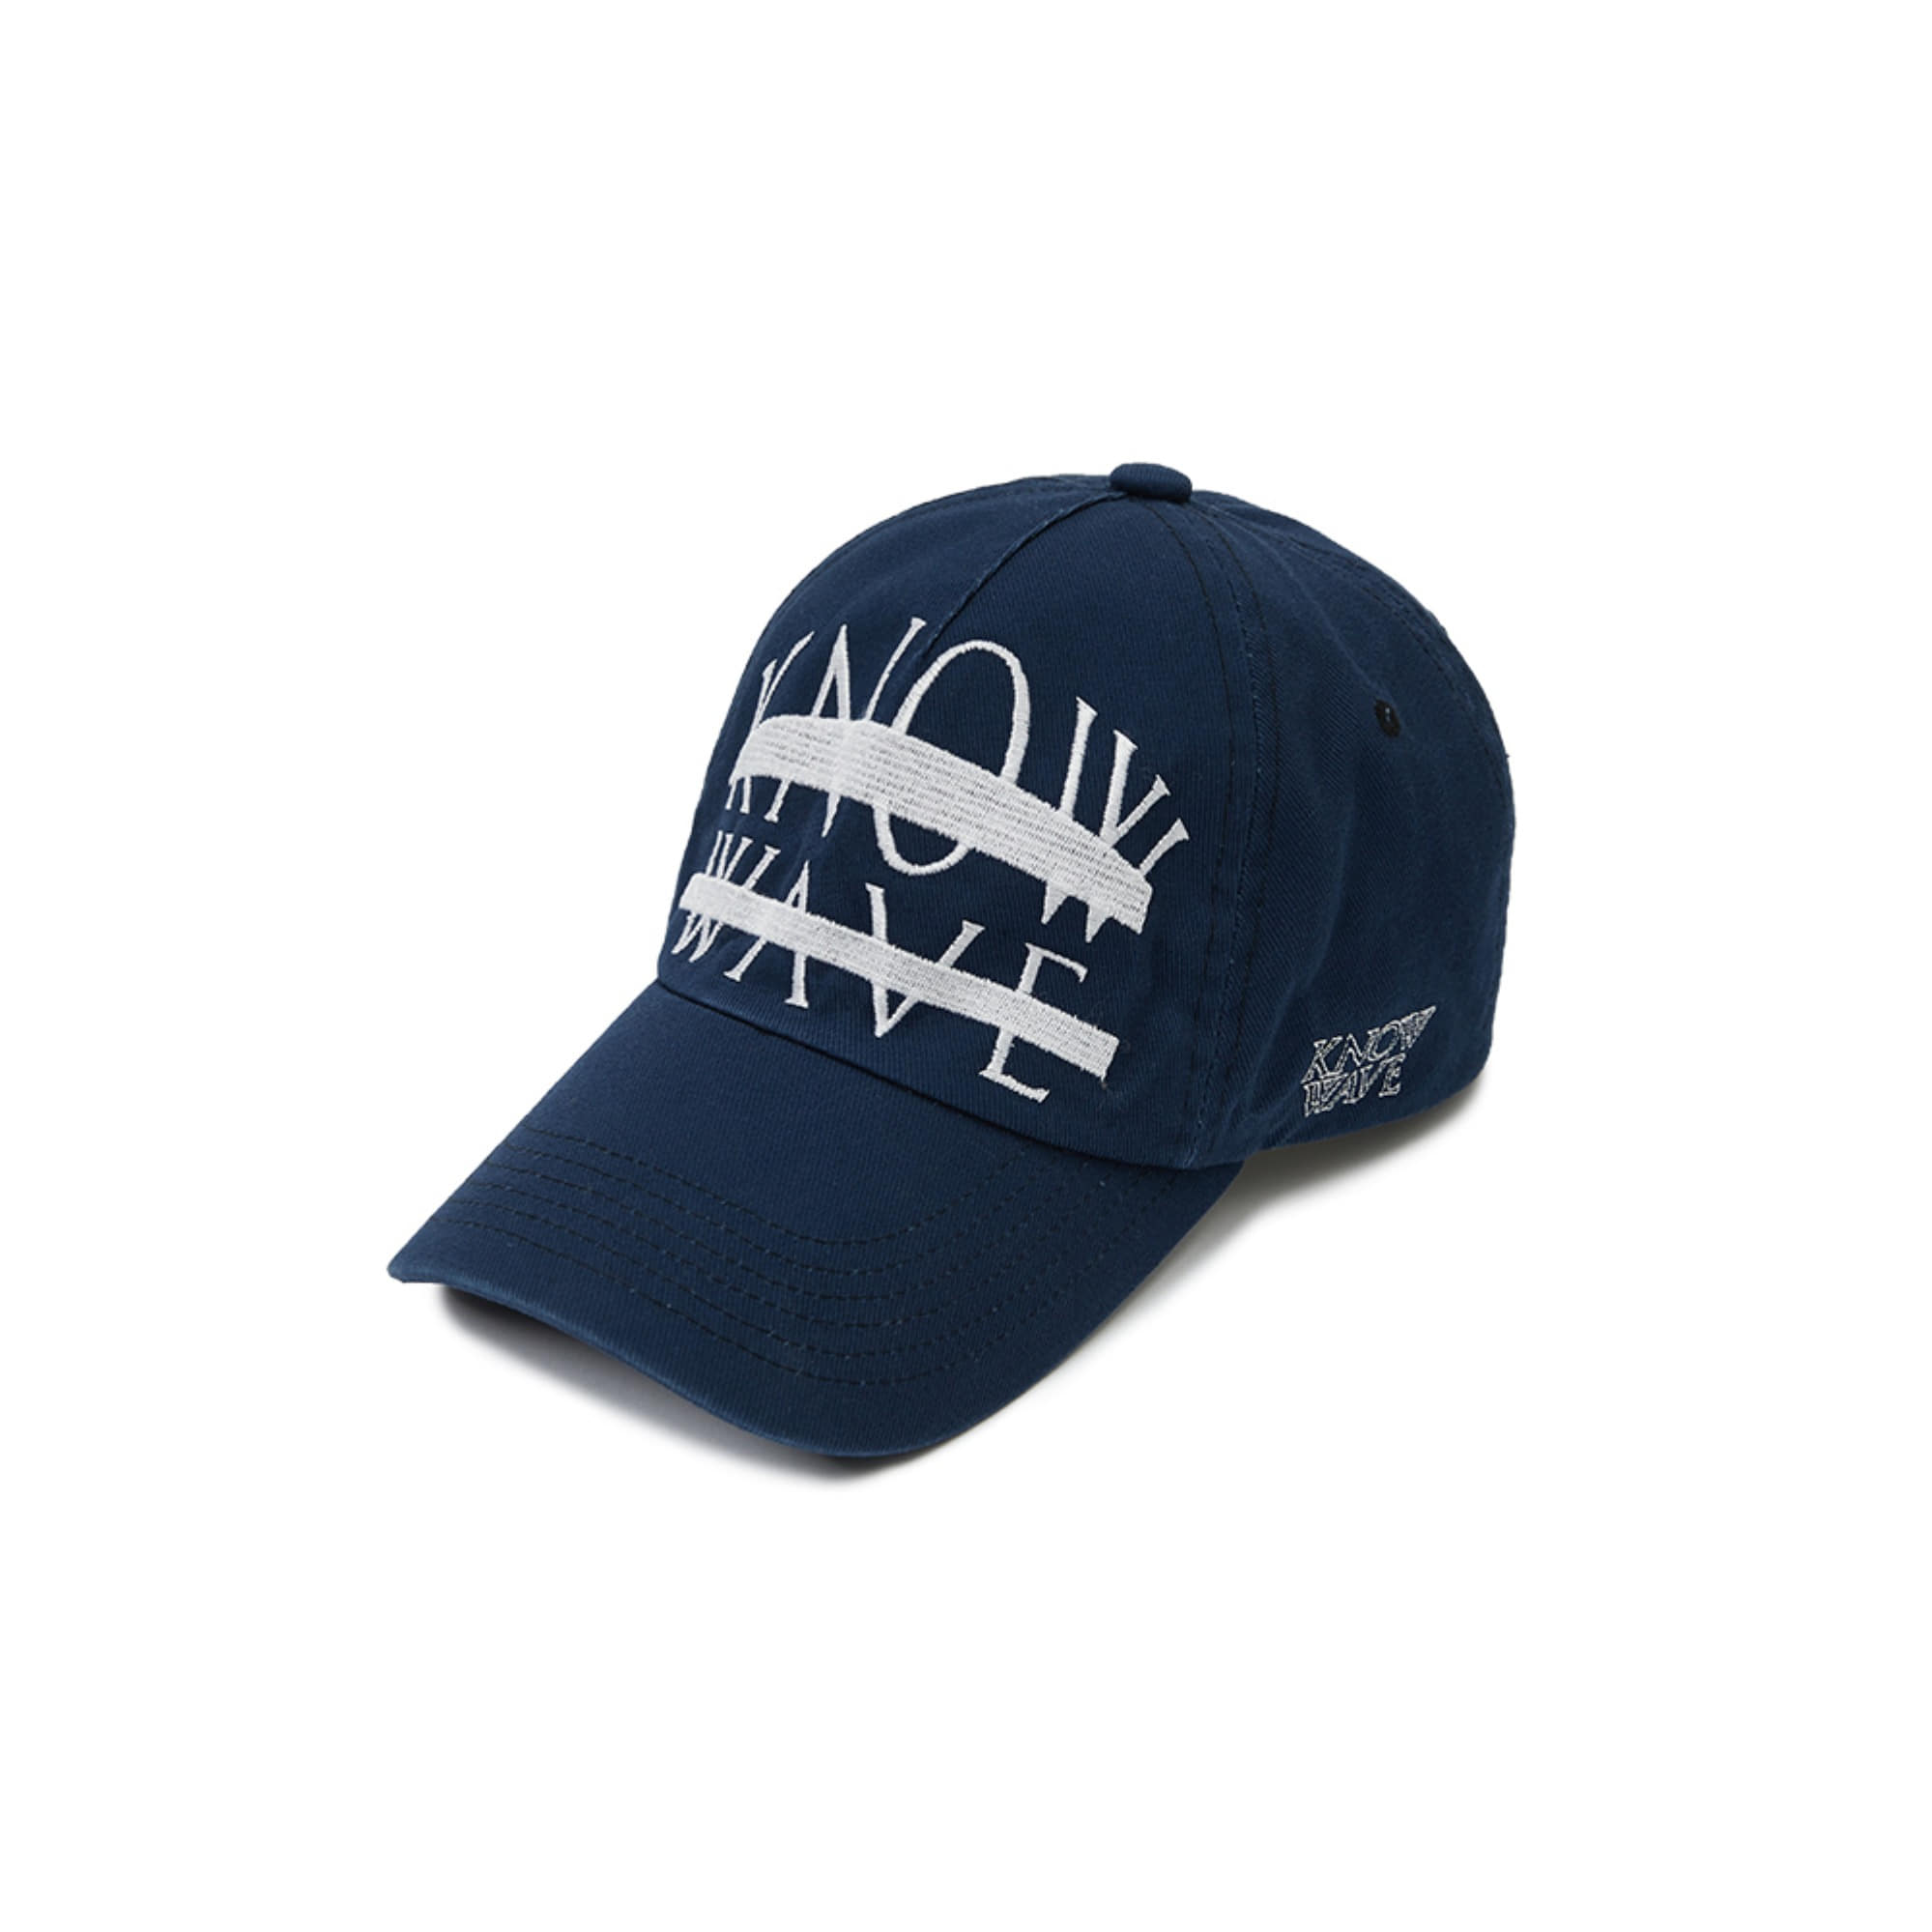 KNOW WAVE BIG LOGO EMBROIDERY BALL-CAP KNA019m(NAVY)